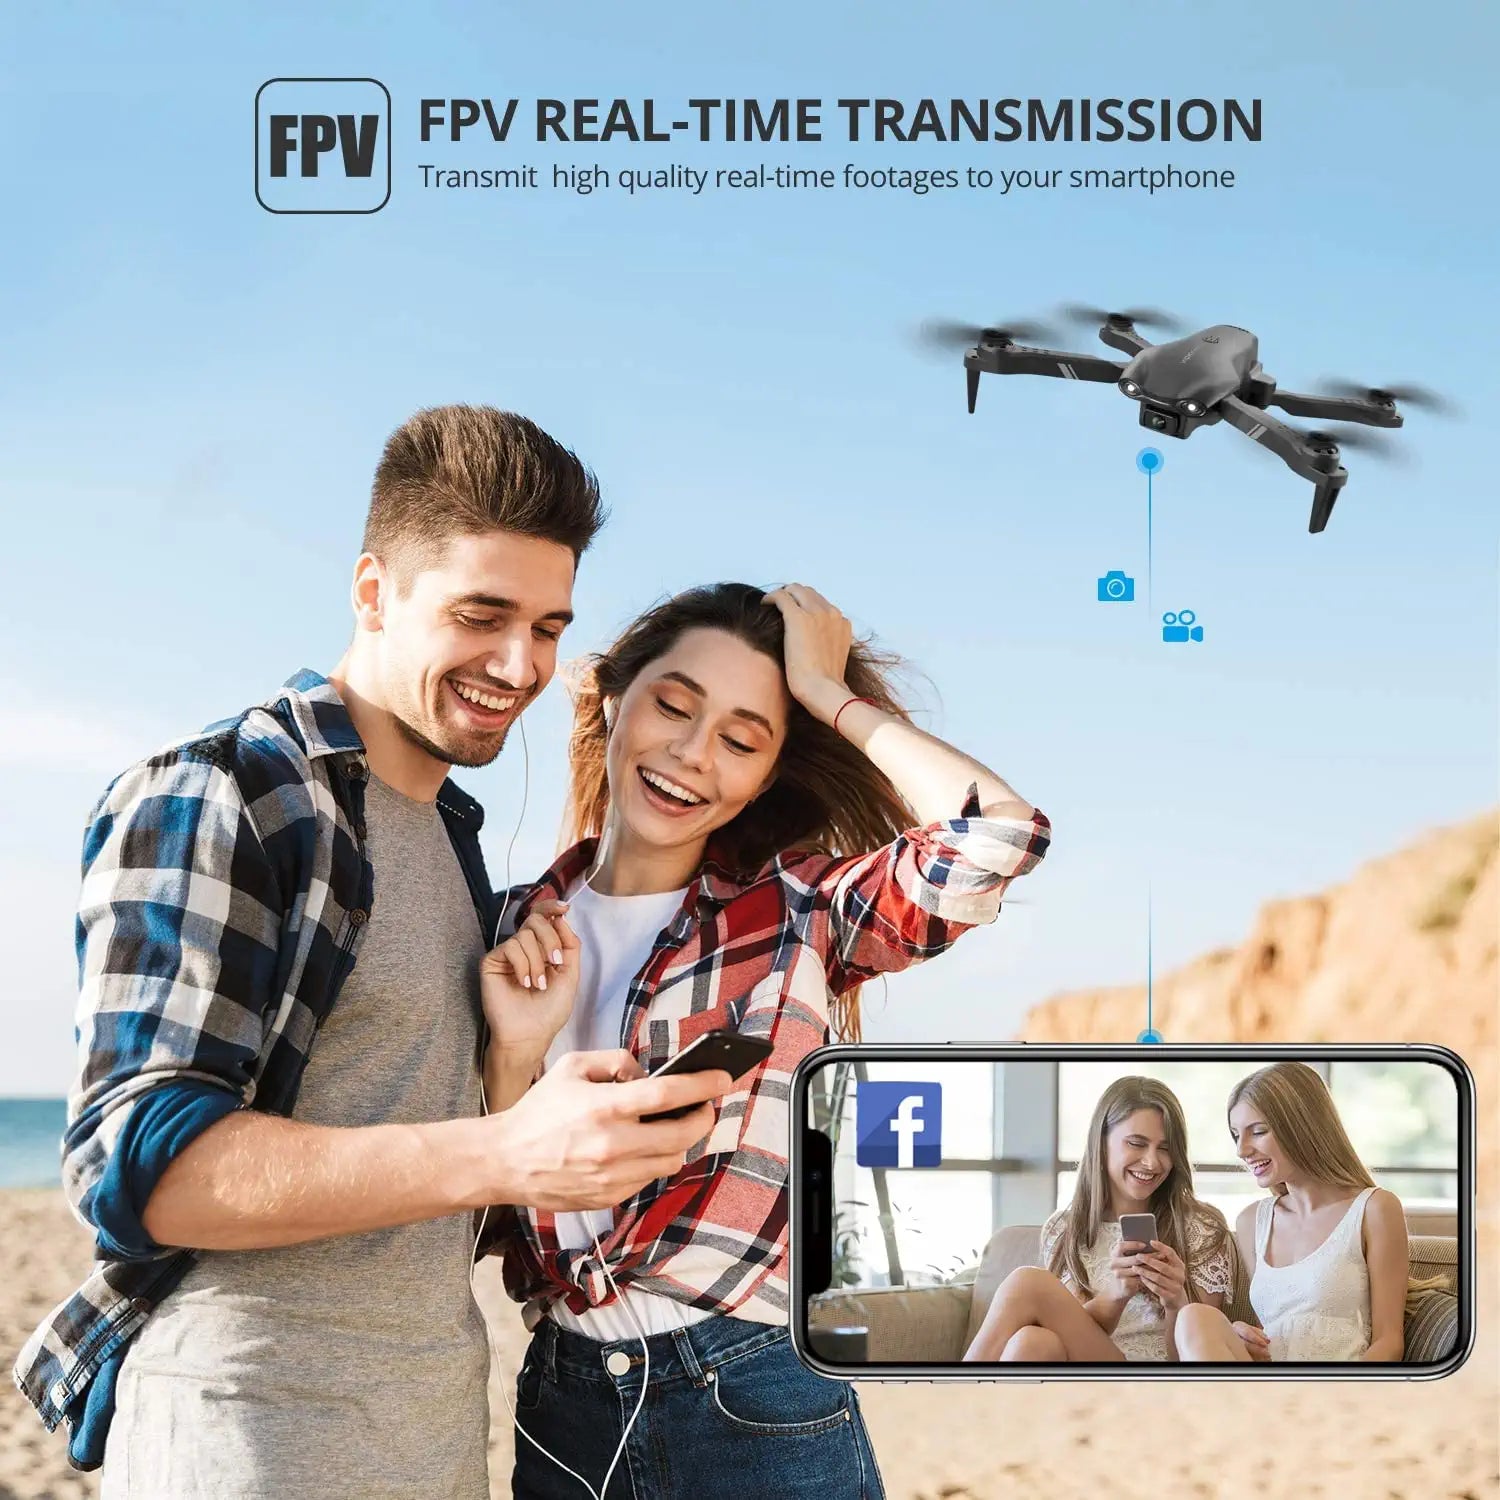 DRONEEYE 4DV13 Drone - for kids Adults with 1080P HD FPV Camera, Foldable Mini RC Quadcopter With Waypoint, Functions,Headless Mode,Altitude Hold,Gesture Selfie,3D Flips,Beginners Toys Gifts - RCDrone